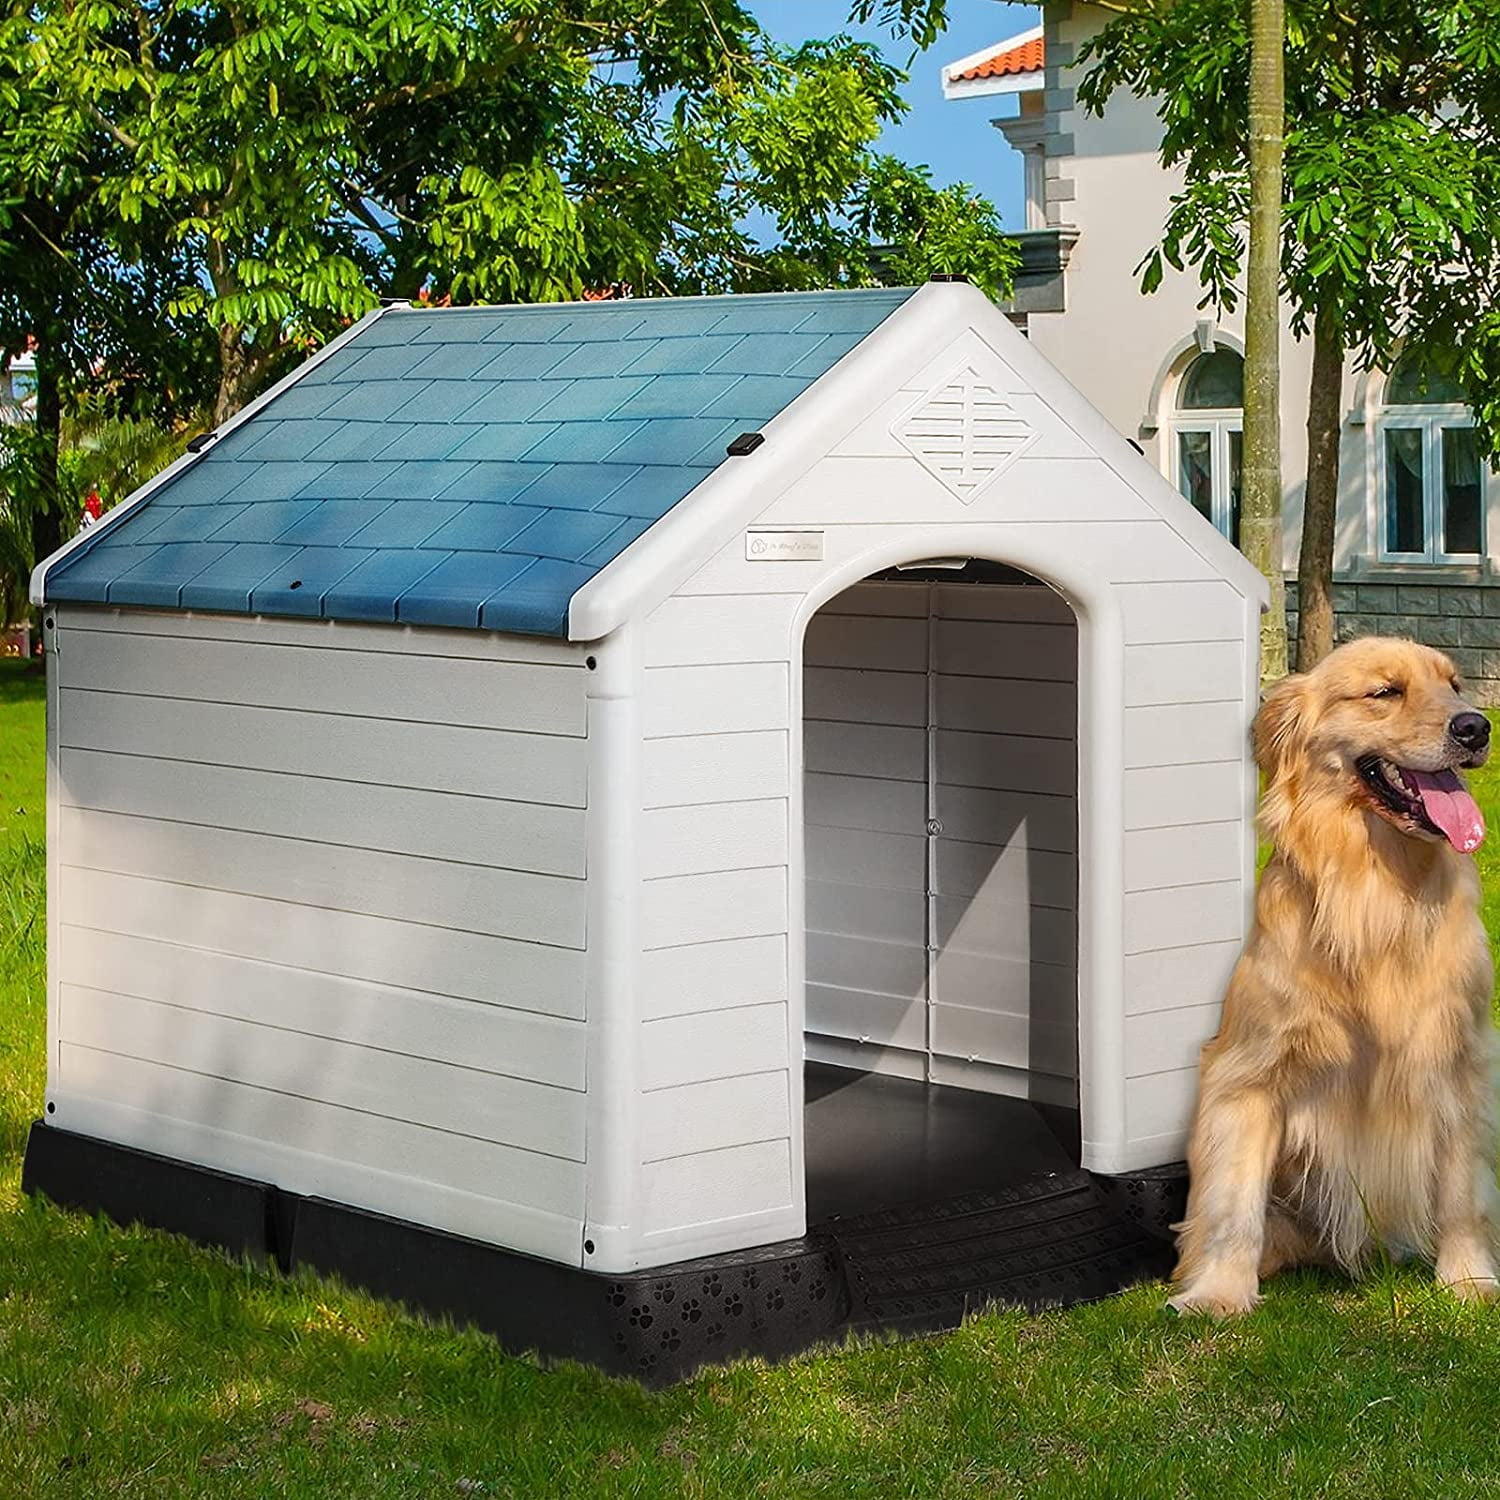 R/E Indoor Outdoor Dog House Plastic Large Dog House for Small Medium Dog Waterproof Resistant Sun Pet Kennel with Air Vents and Elevated Floor,Easy Assembly 